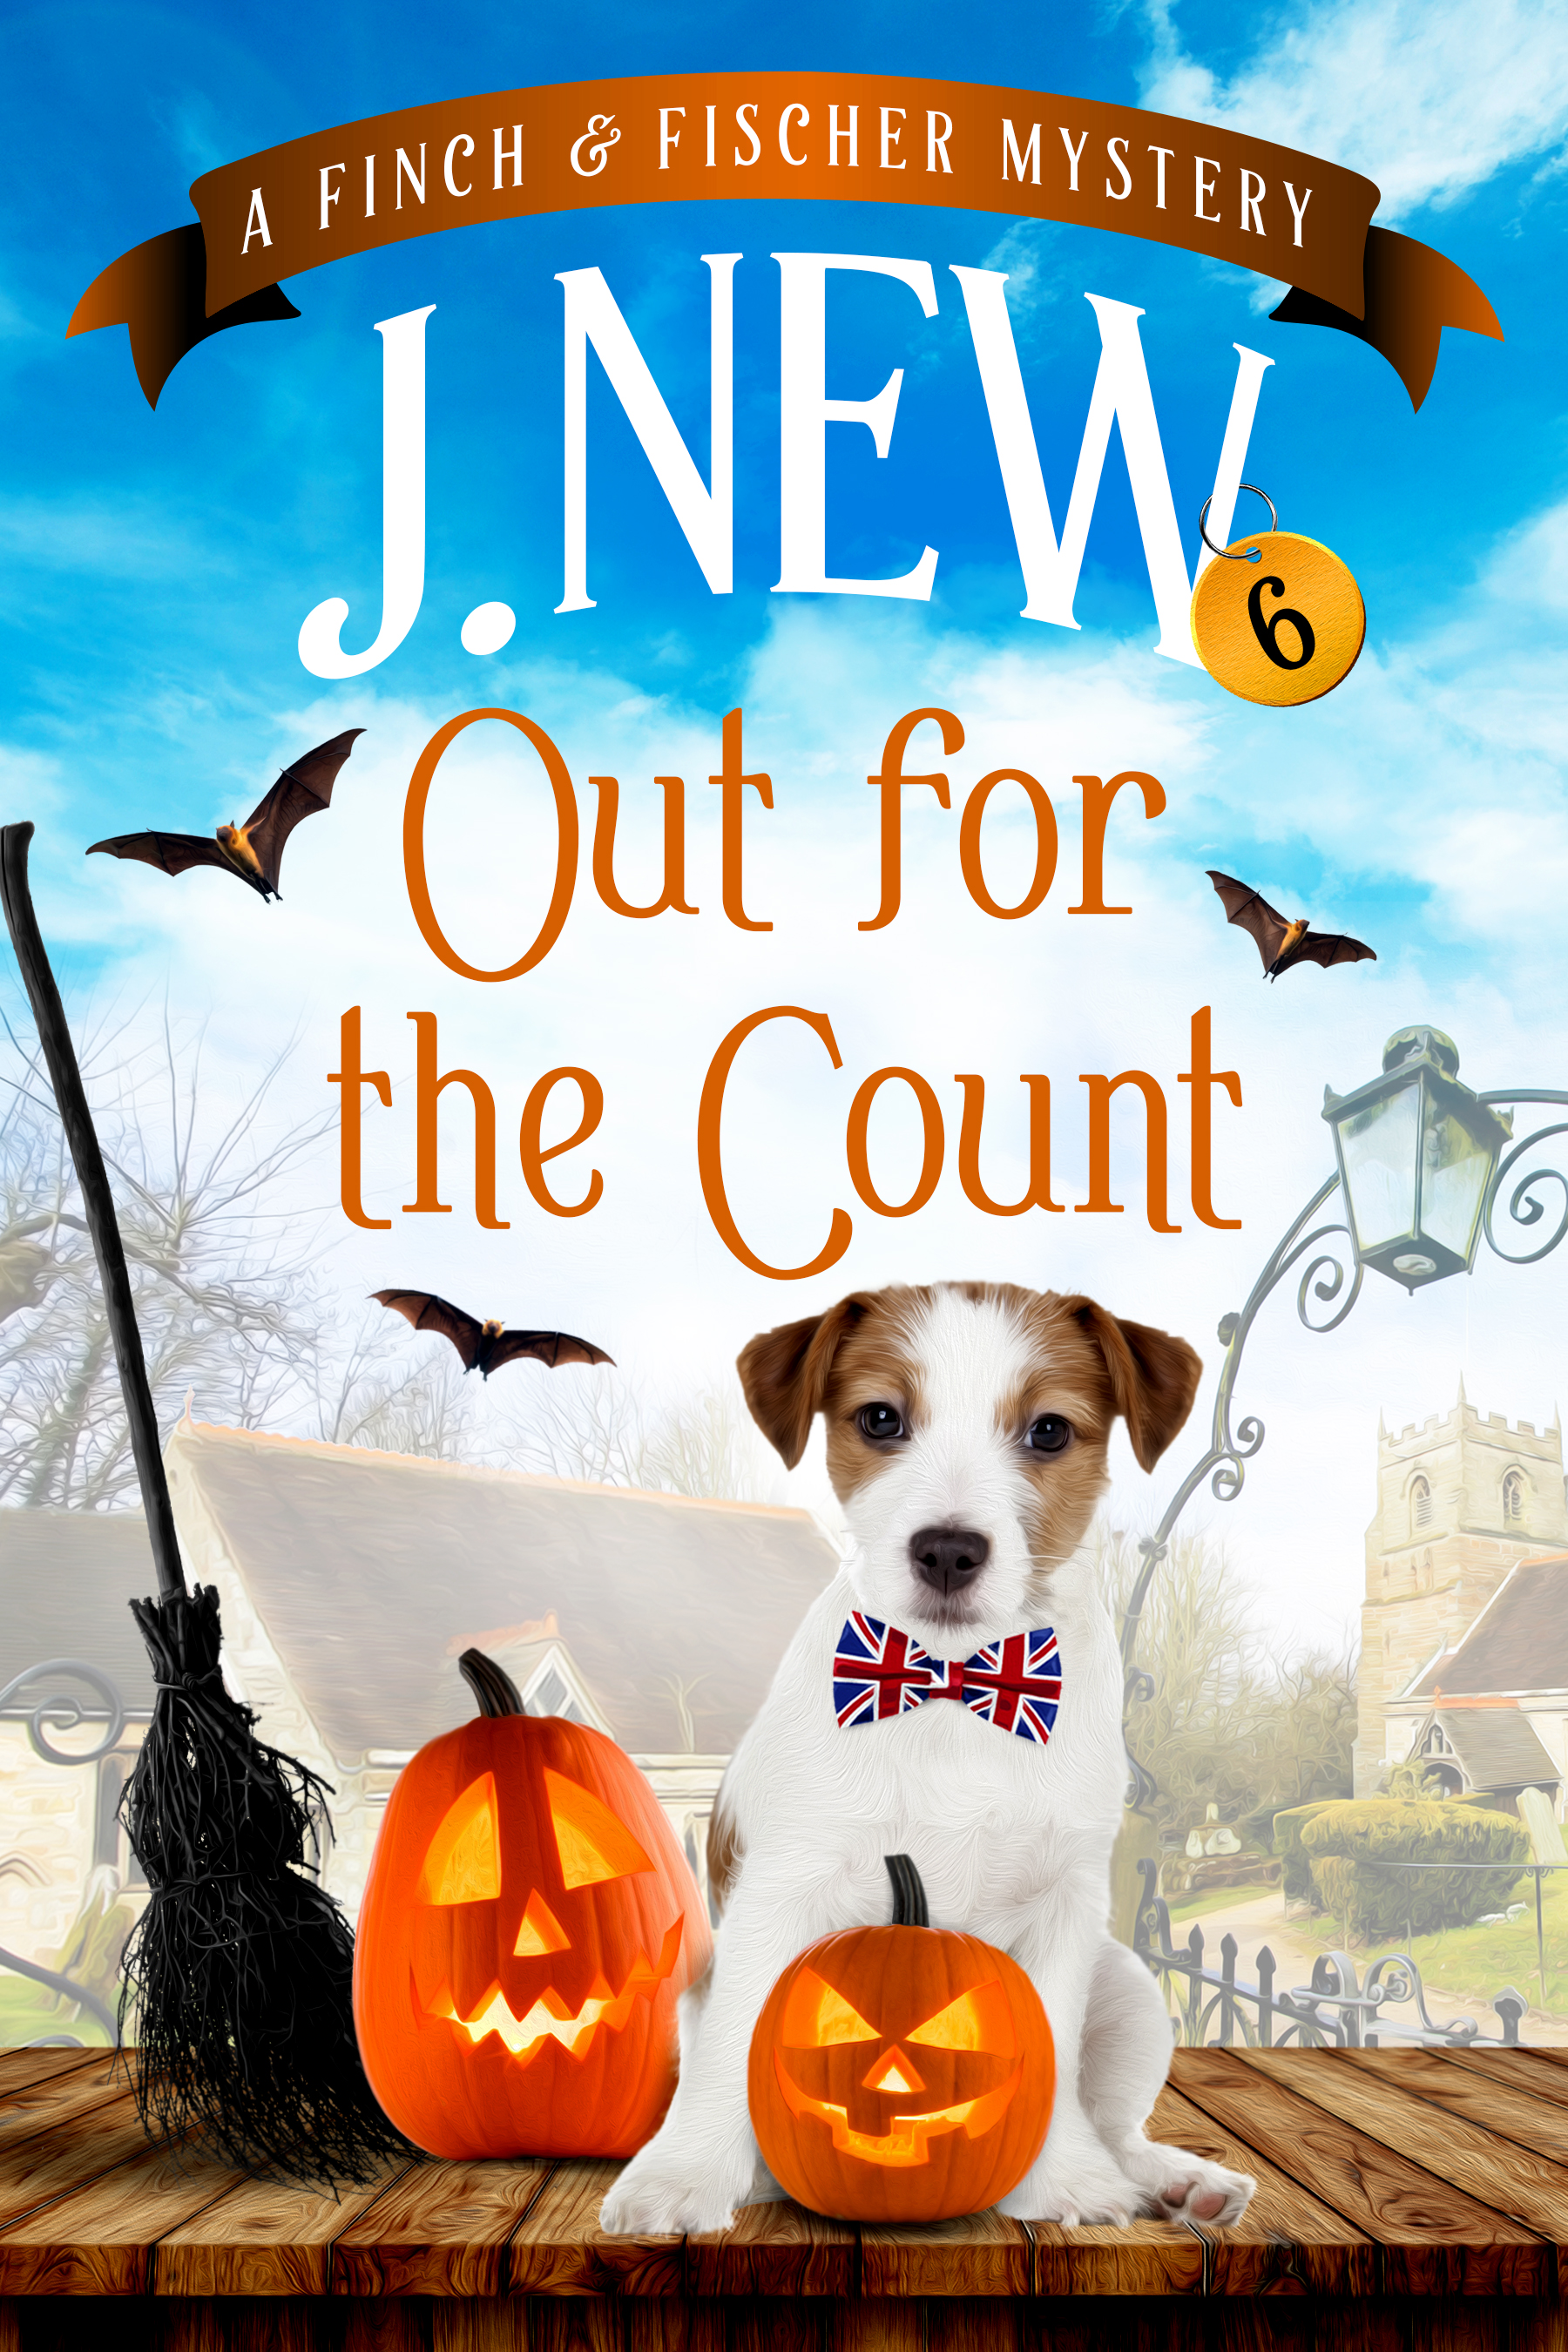 Out for the Count book 6 in the popular Finch and Fischer cozy mystery series by J. New